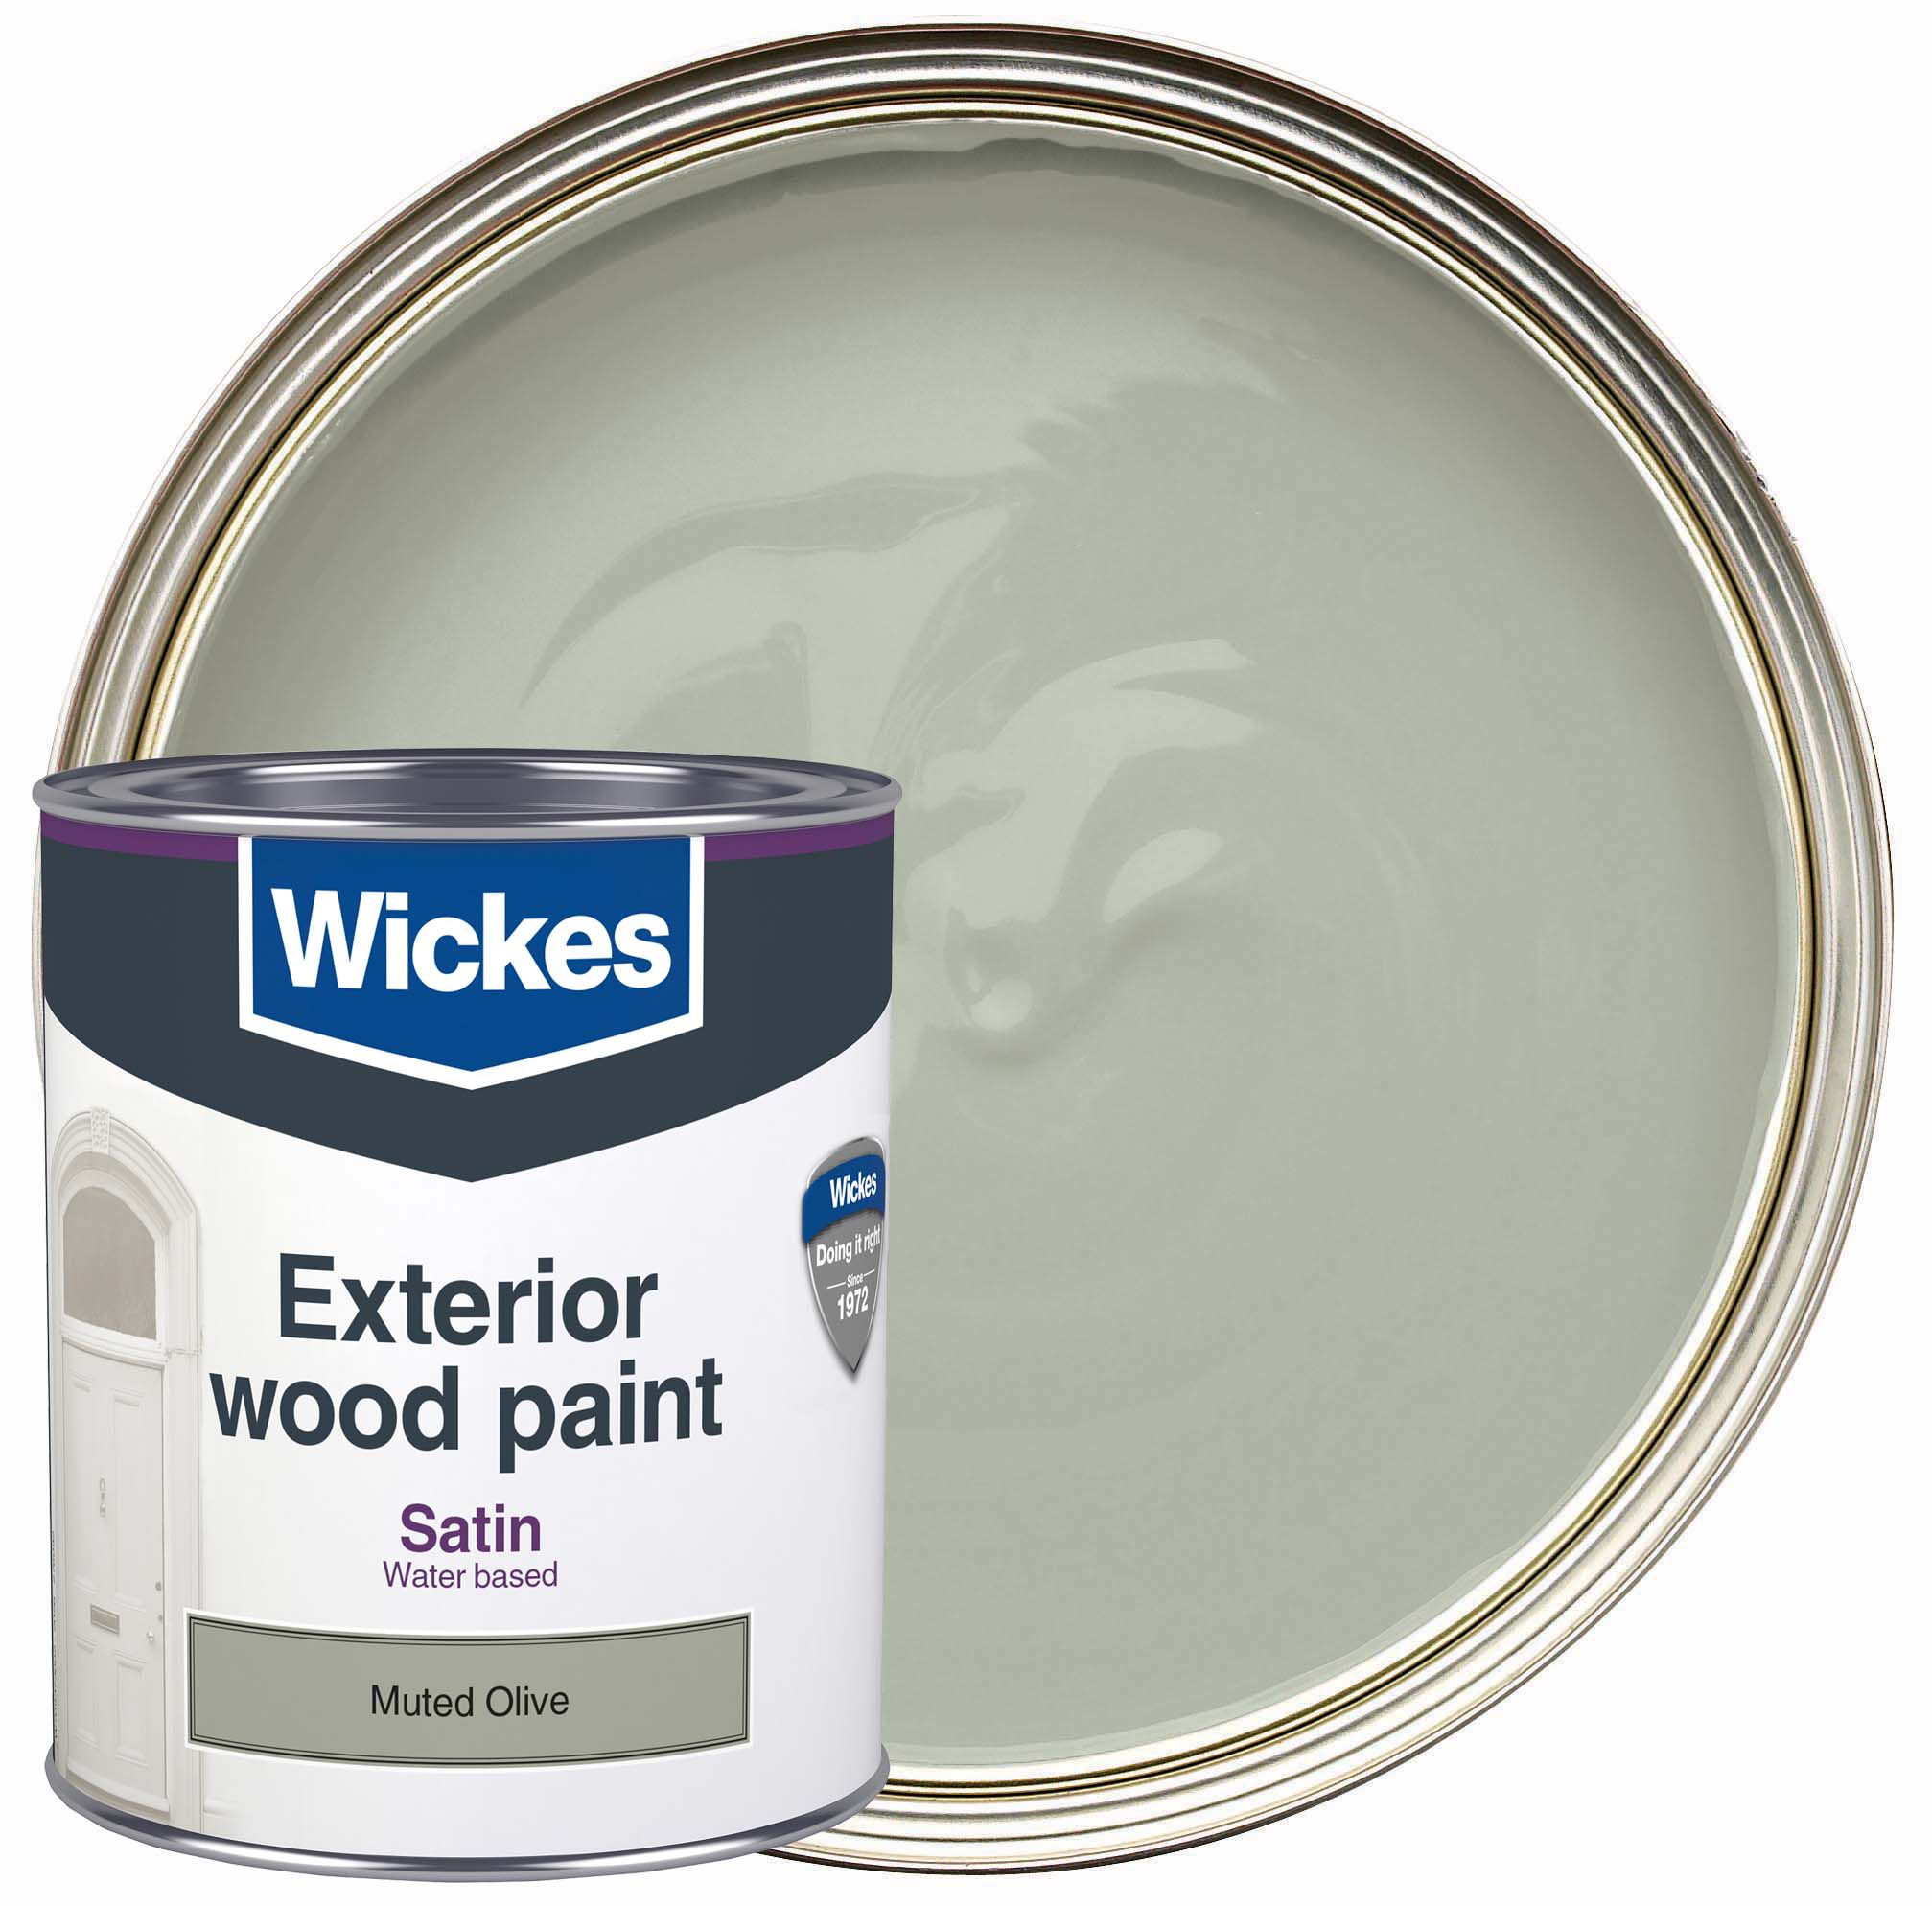 Image of Wickes Exterior Satinwood Paint Muted Olive 750ml